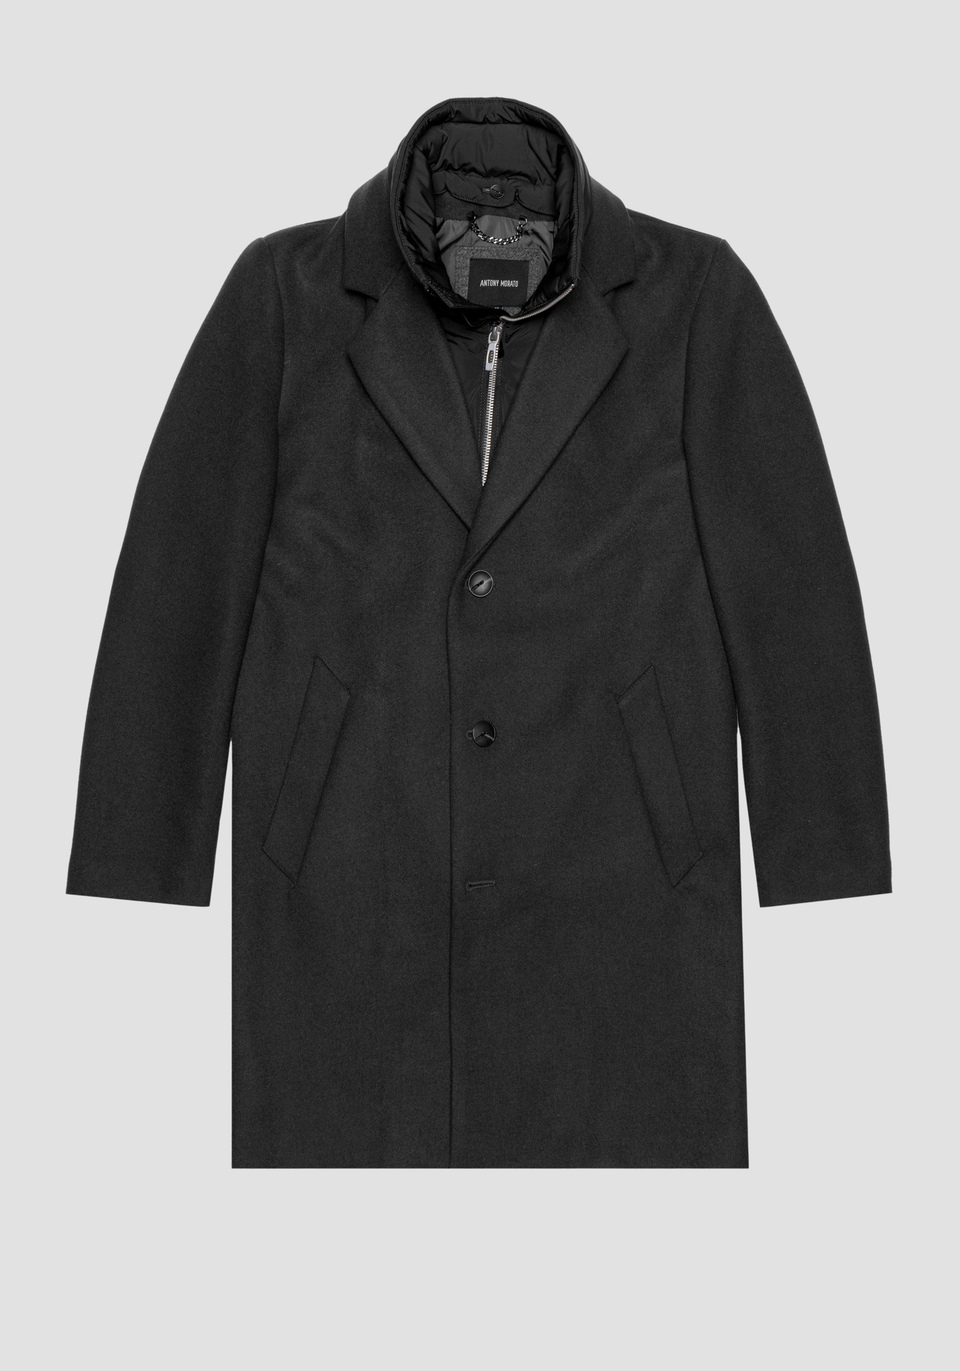 "RUPERT" REGULAR FIT COAT IN WOOL AND CASHMERE BLEND WITH TECHNICAL FABRIC INSERT - Antony Morato Online Shop